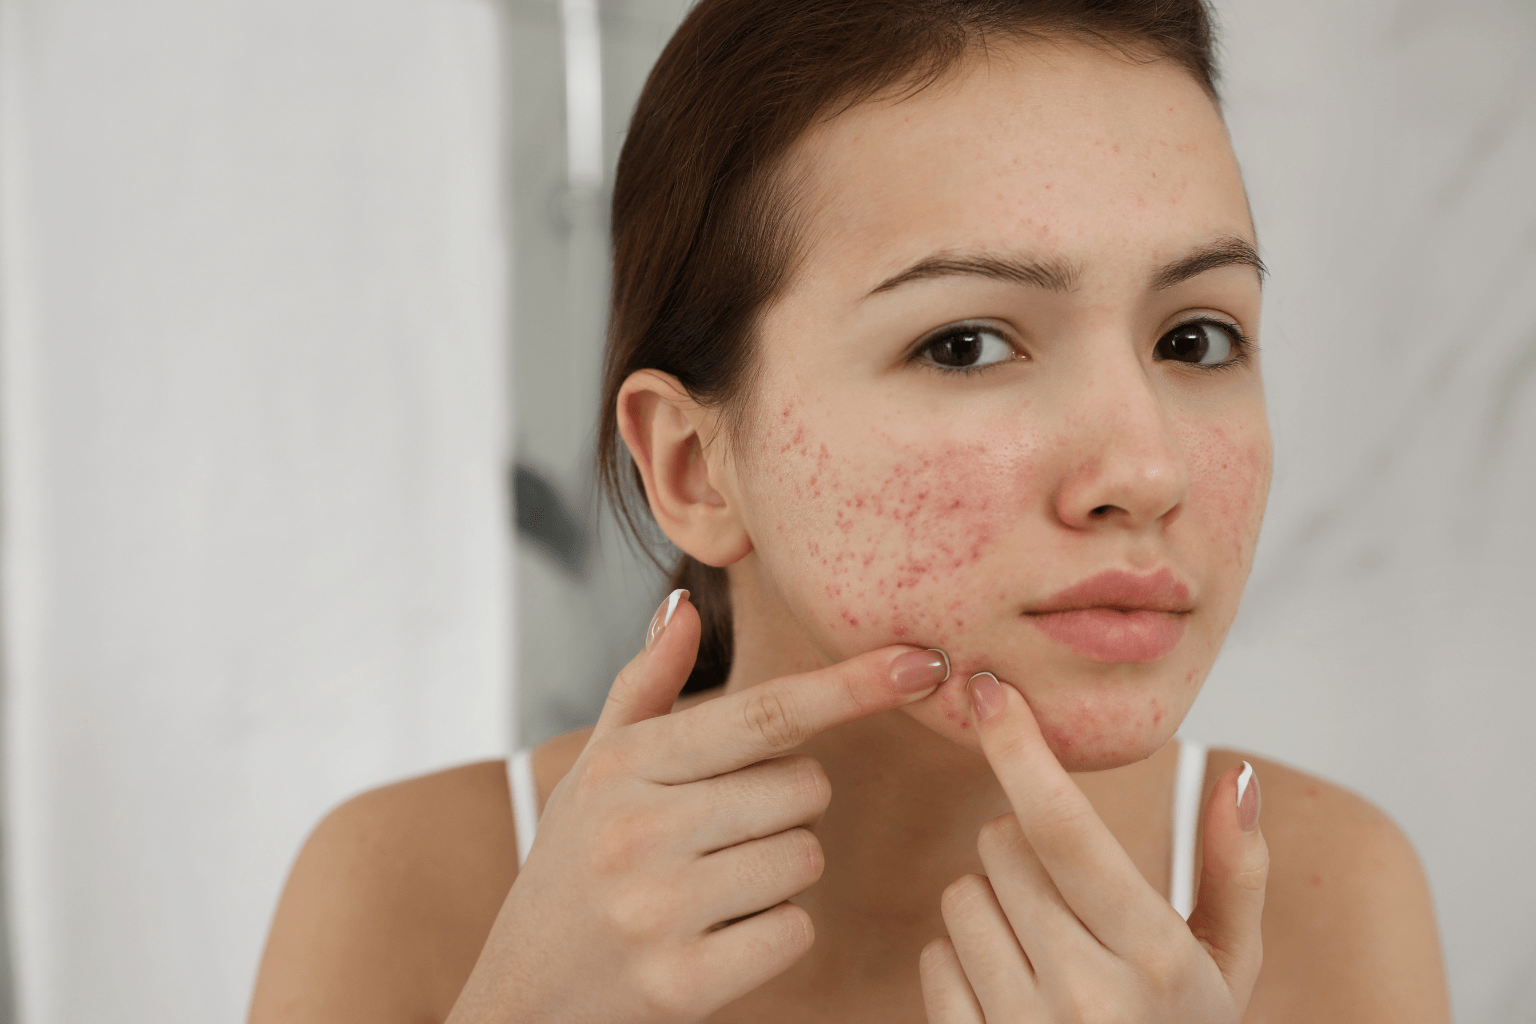 Does Dandruff Cause Acne – Dandruff’s Influence on Acne